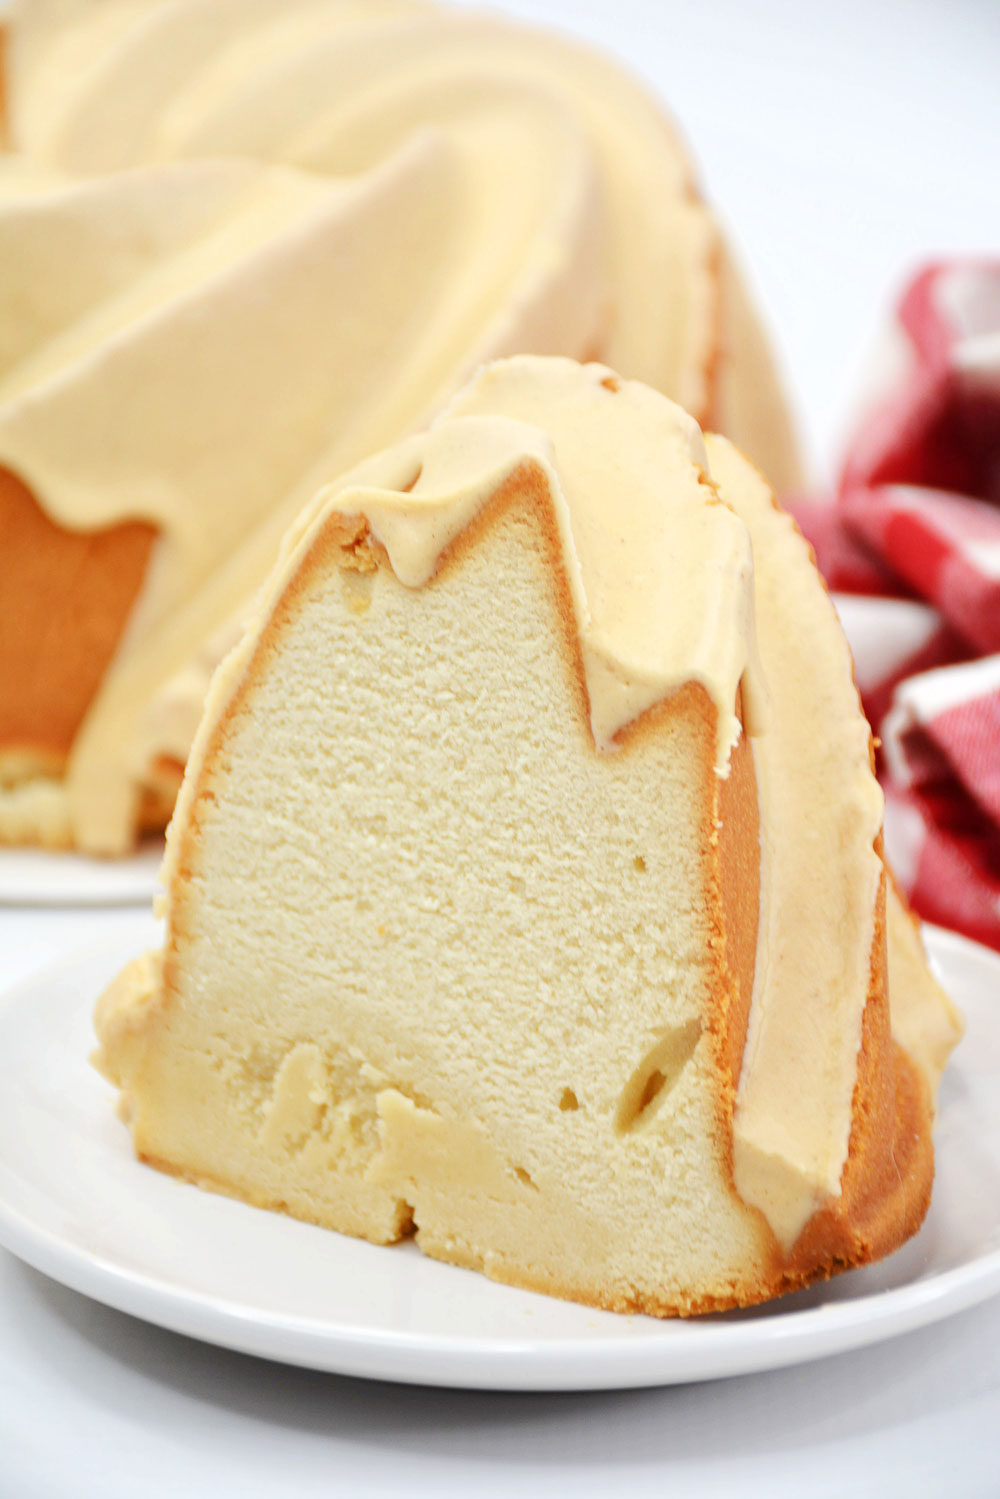 Soft and moist Mexican tress leches bundt cake makes an irresistible dessert that is perfect for every occasion. It’s sweet, creamy, and sooo good.